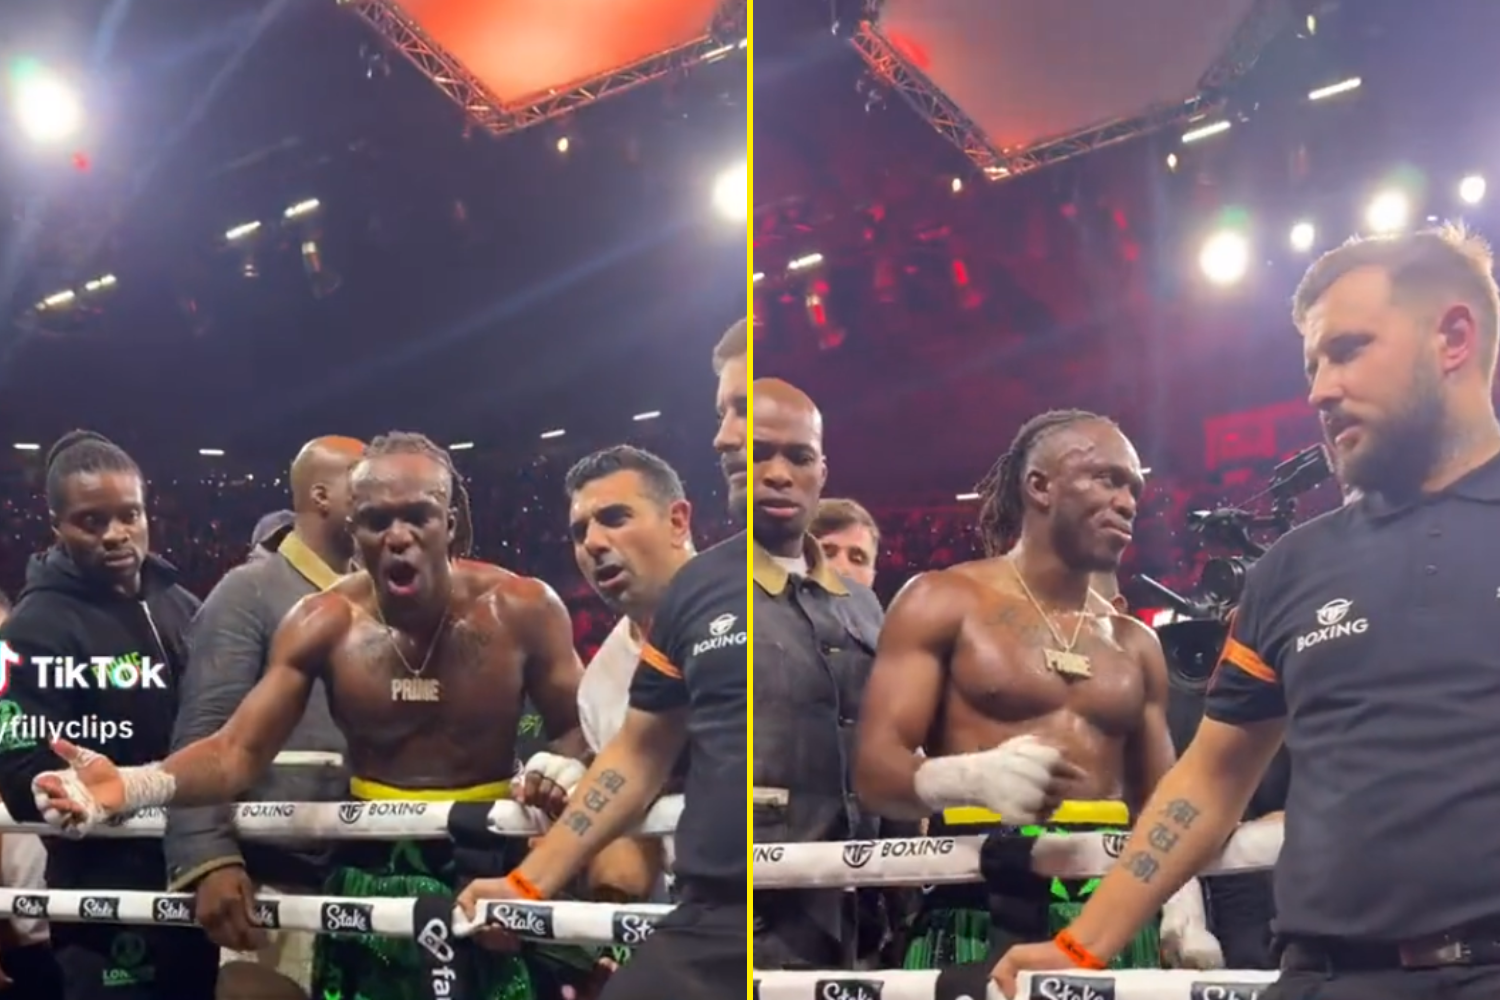 New footage shows KSI confronting judges following controversial Tommy Fury defeat